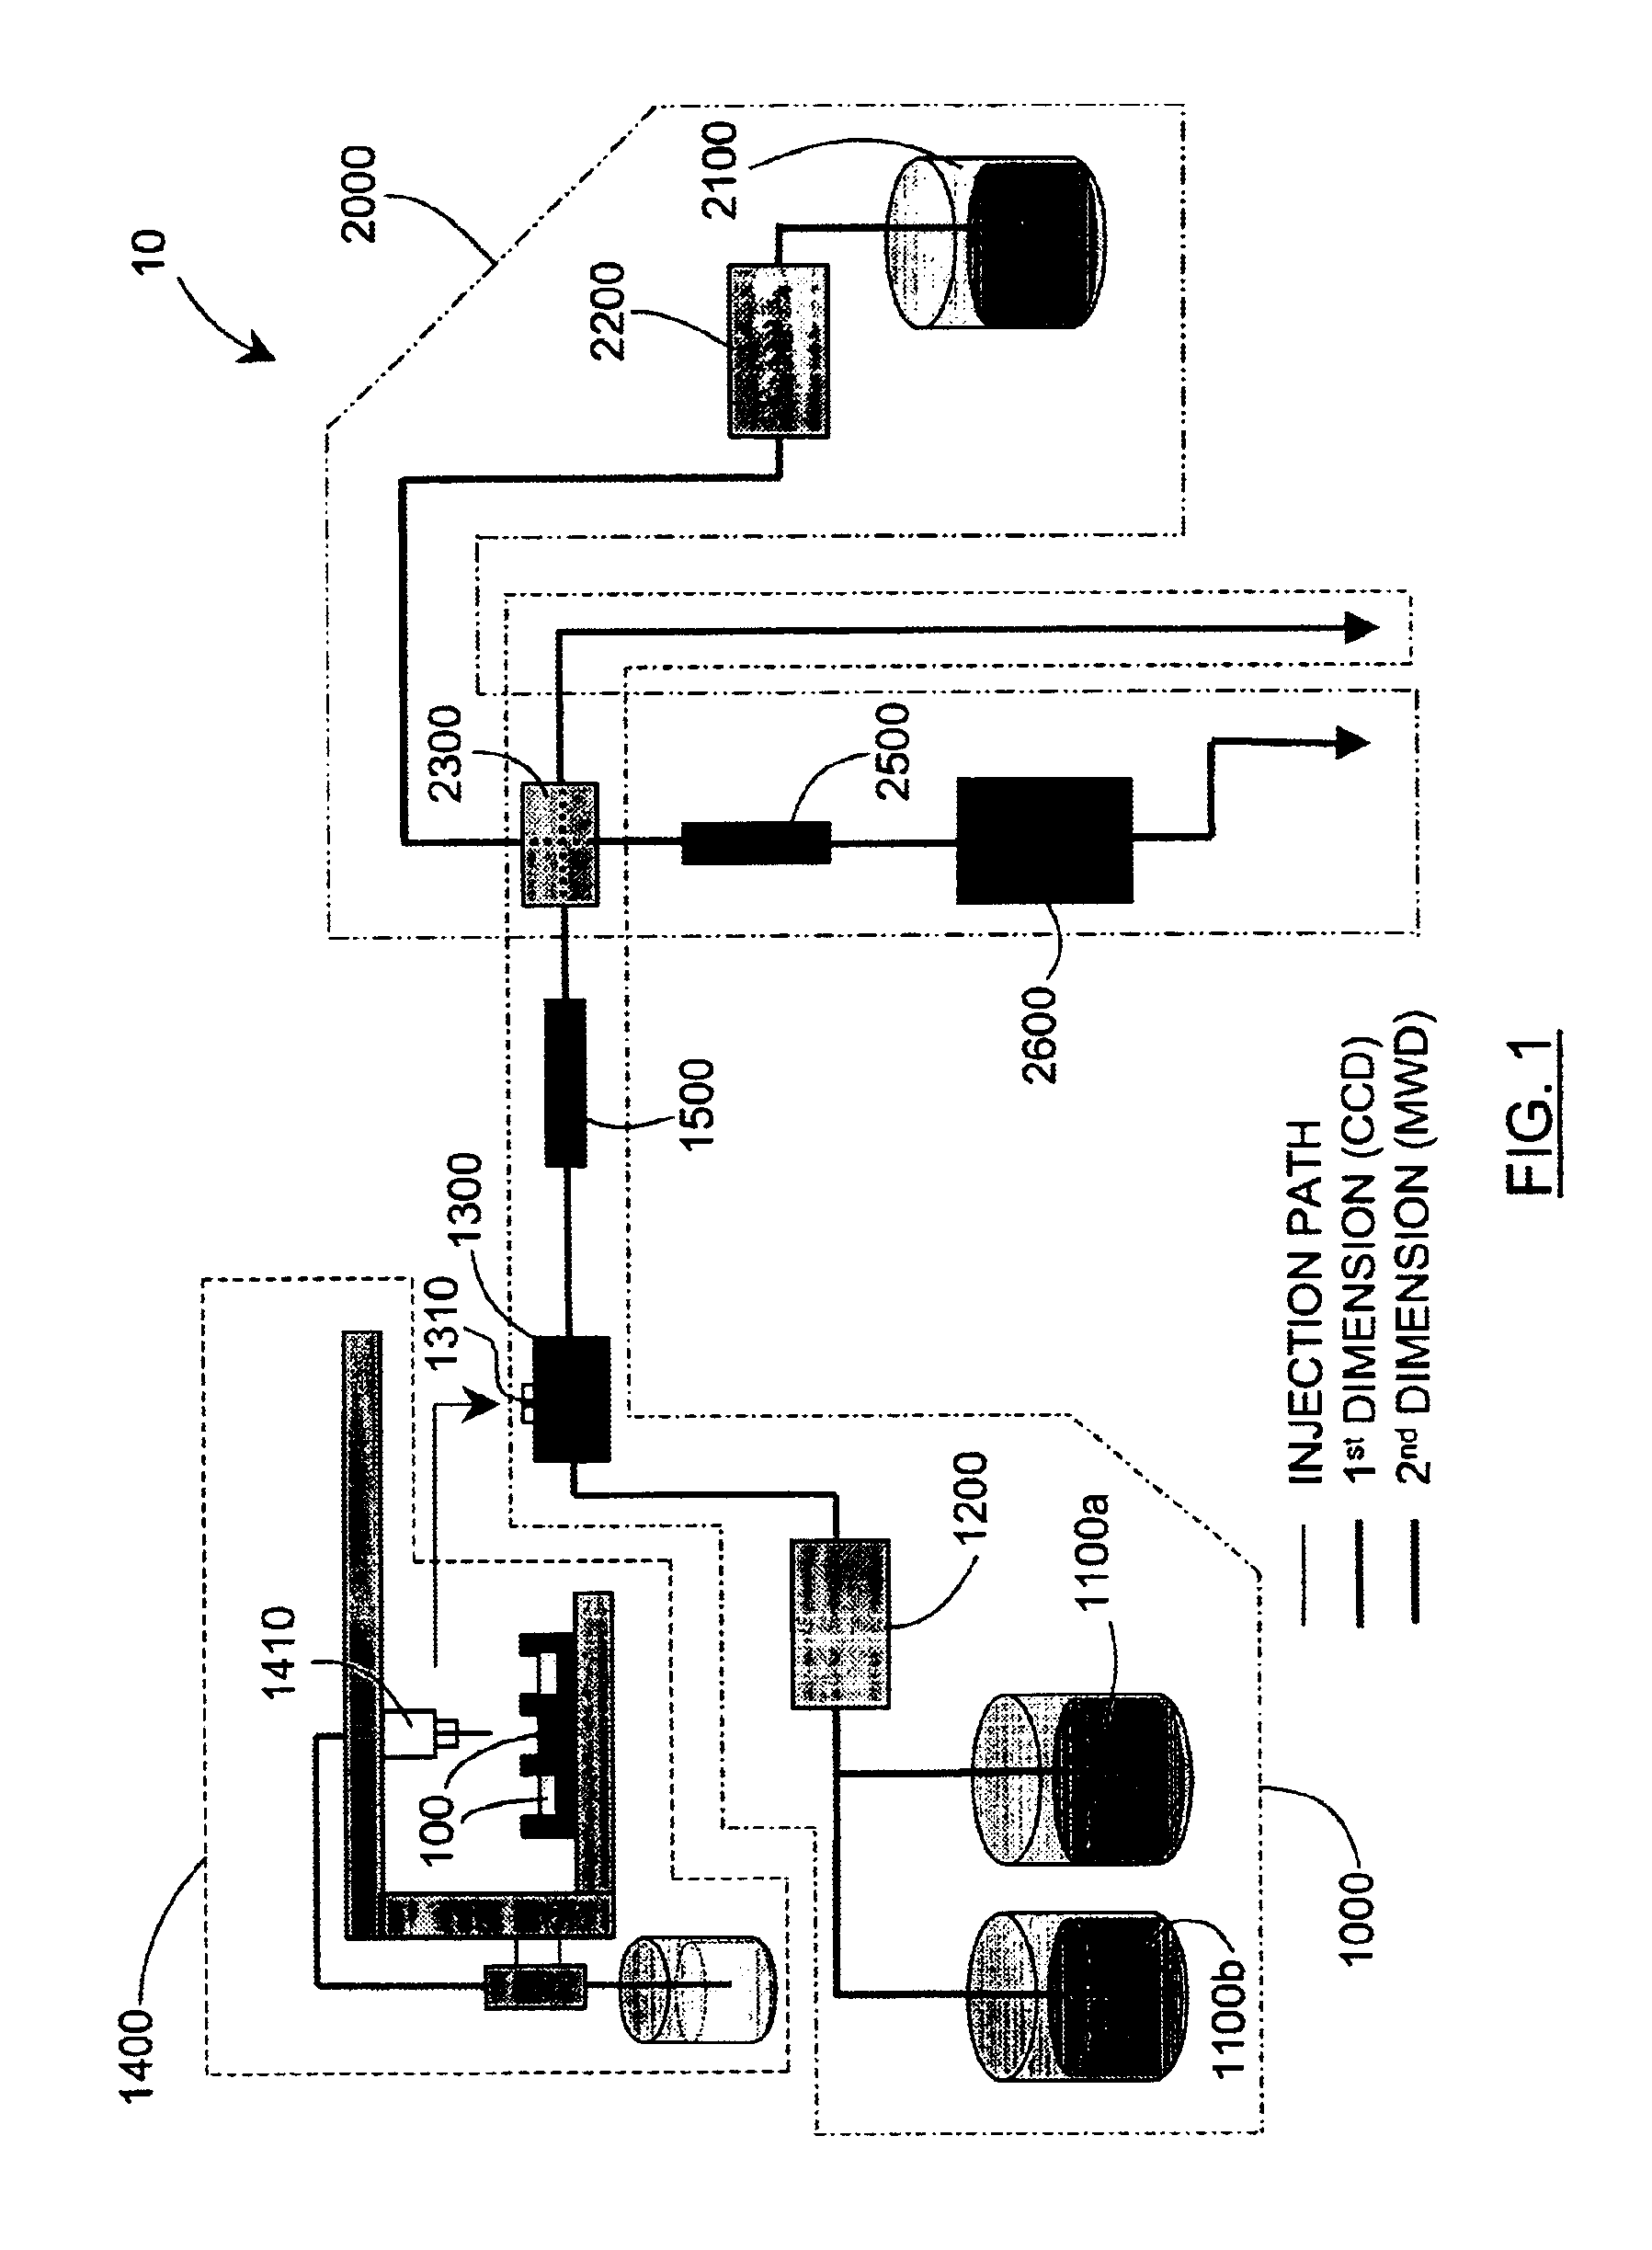 Methods for characterization of polymers using multi-dimensional liquid chromatography with parallel second-dimension sampling